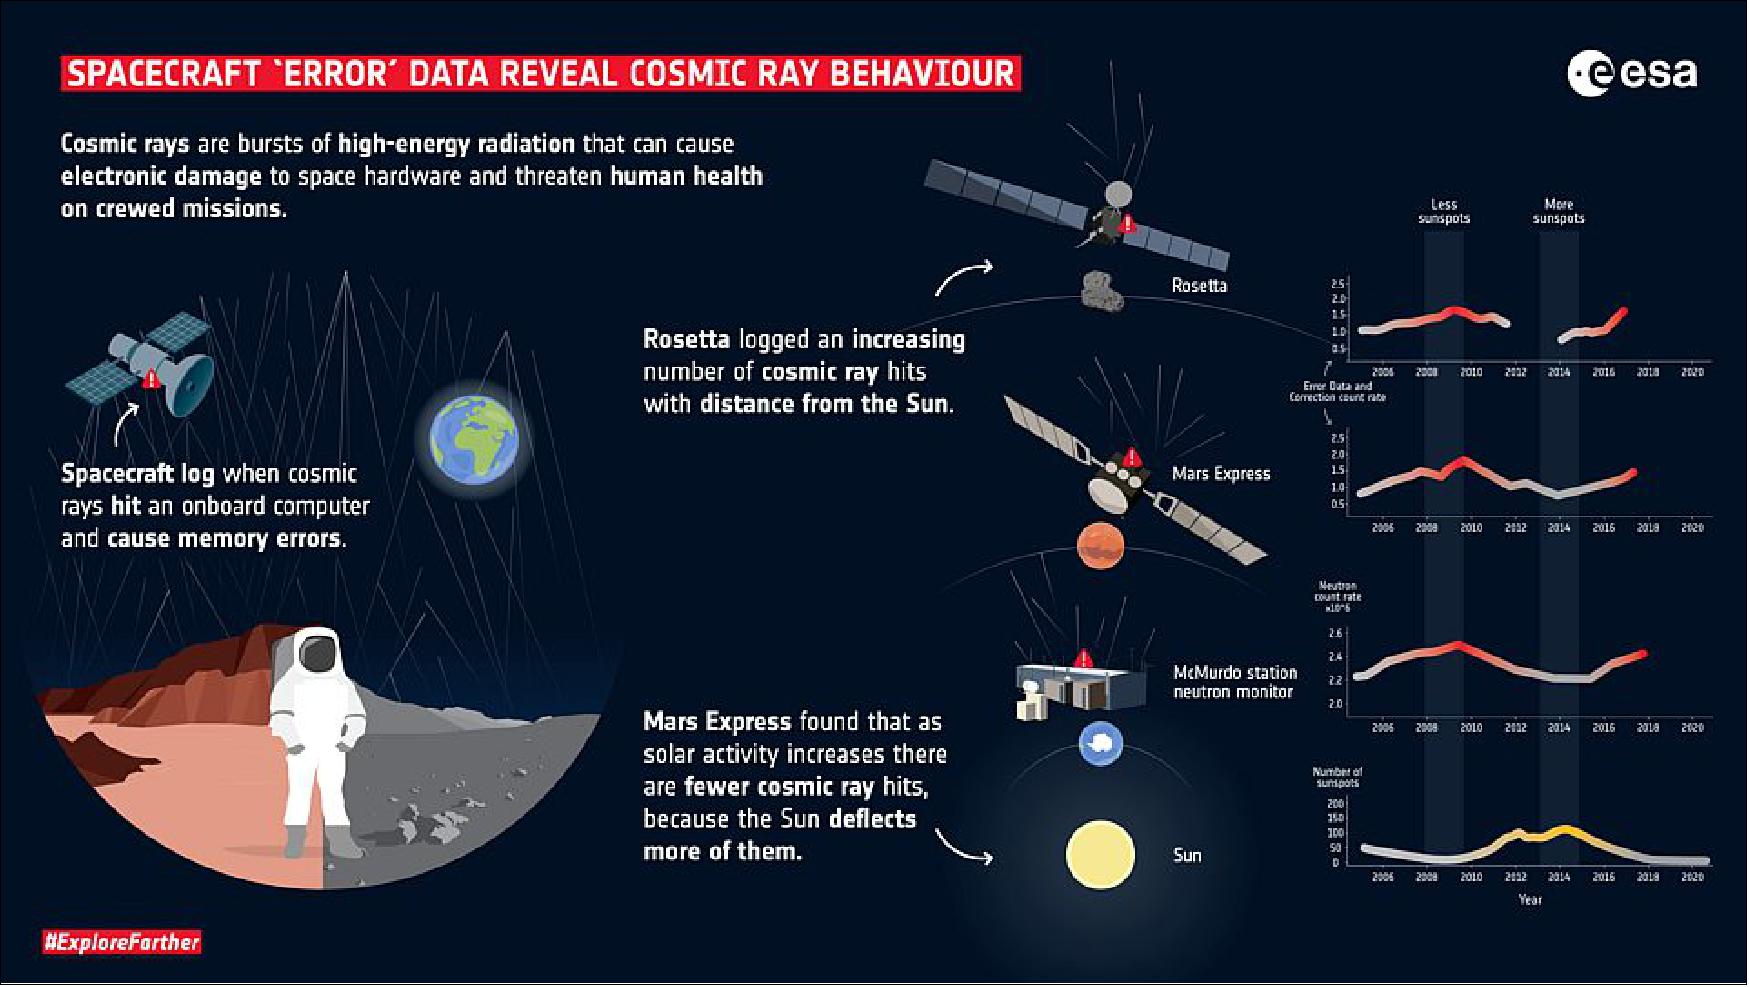 Figure 46: Using data originally gathered for spacecraft ‘housekeeping’ aboard ESA’s Rosetta and Mars Express missions, scientists have revealed how intense bursts of high-energy radiation, known as cosmic rays, behave at Mars and throughout the inner Solar System (image credit: ESA/Data based on Knutsen et al.,)